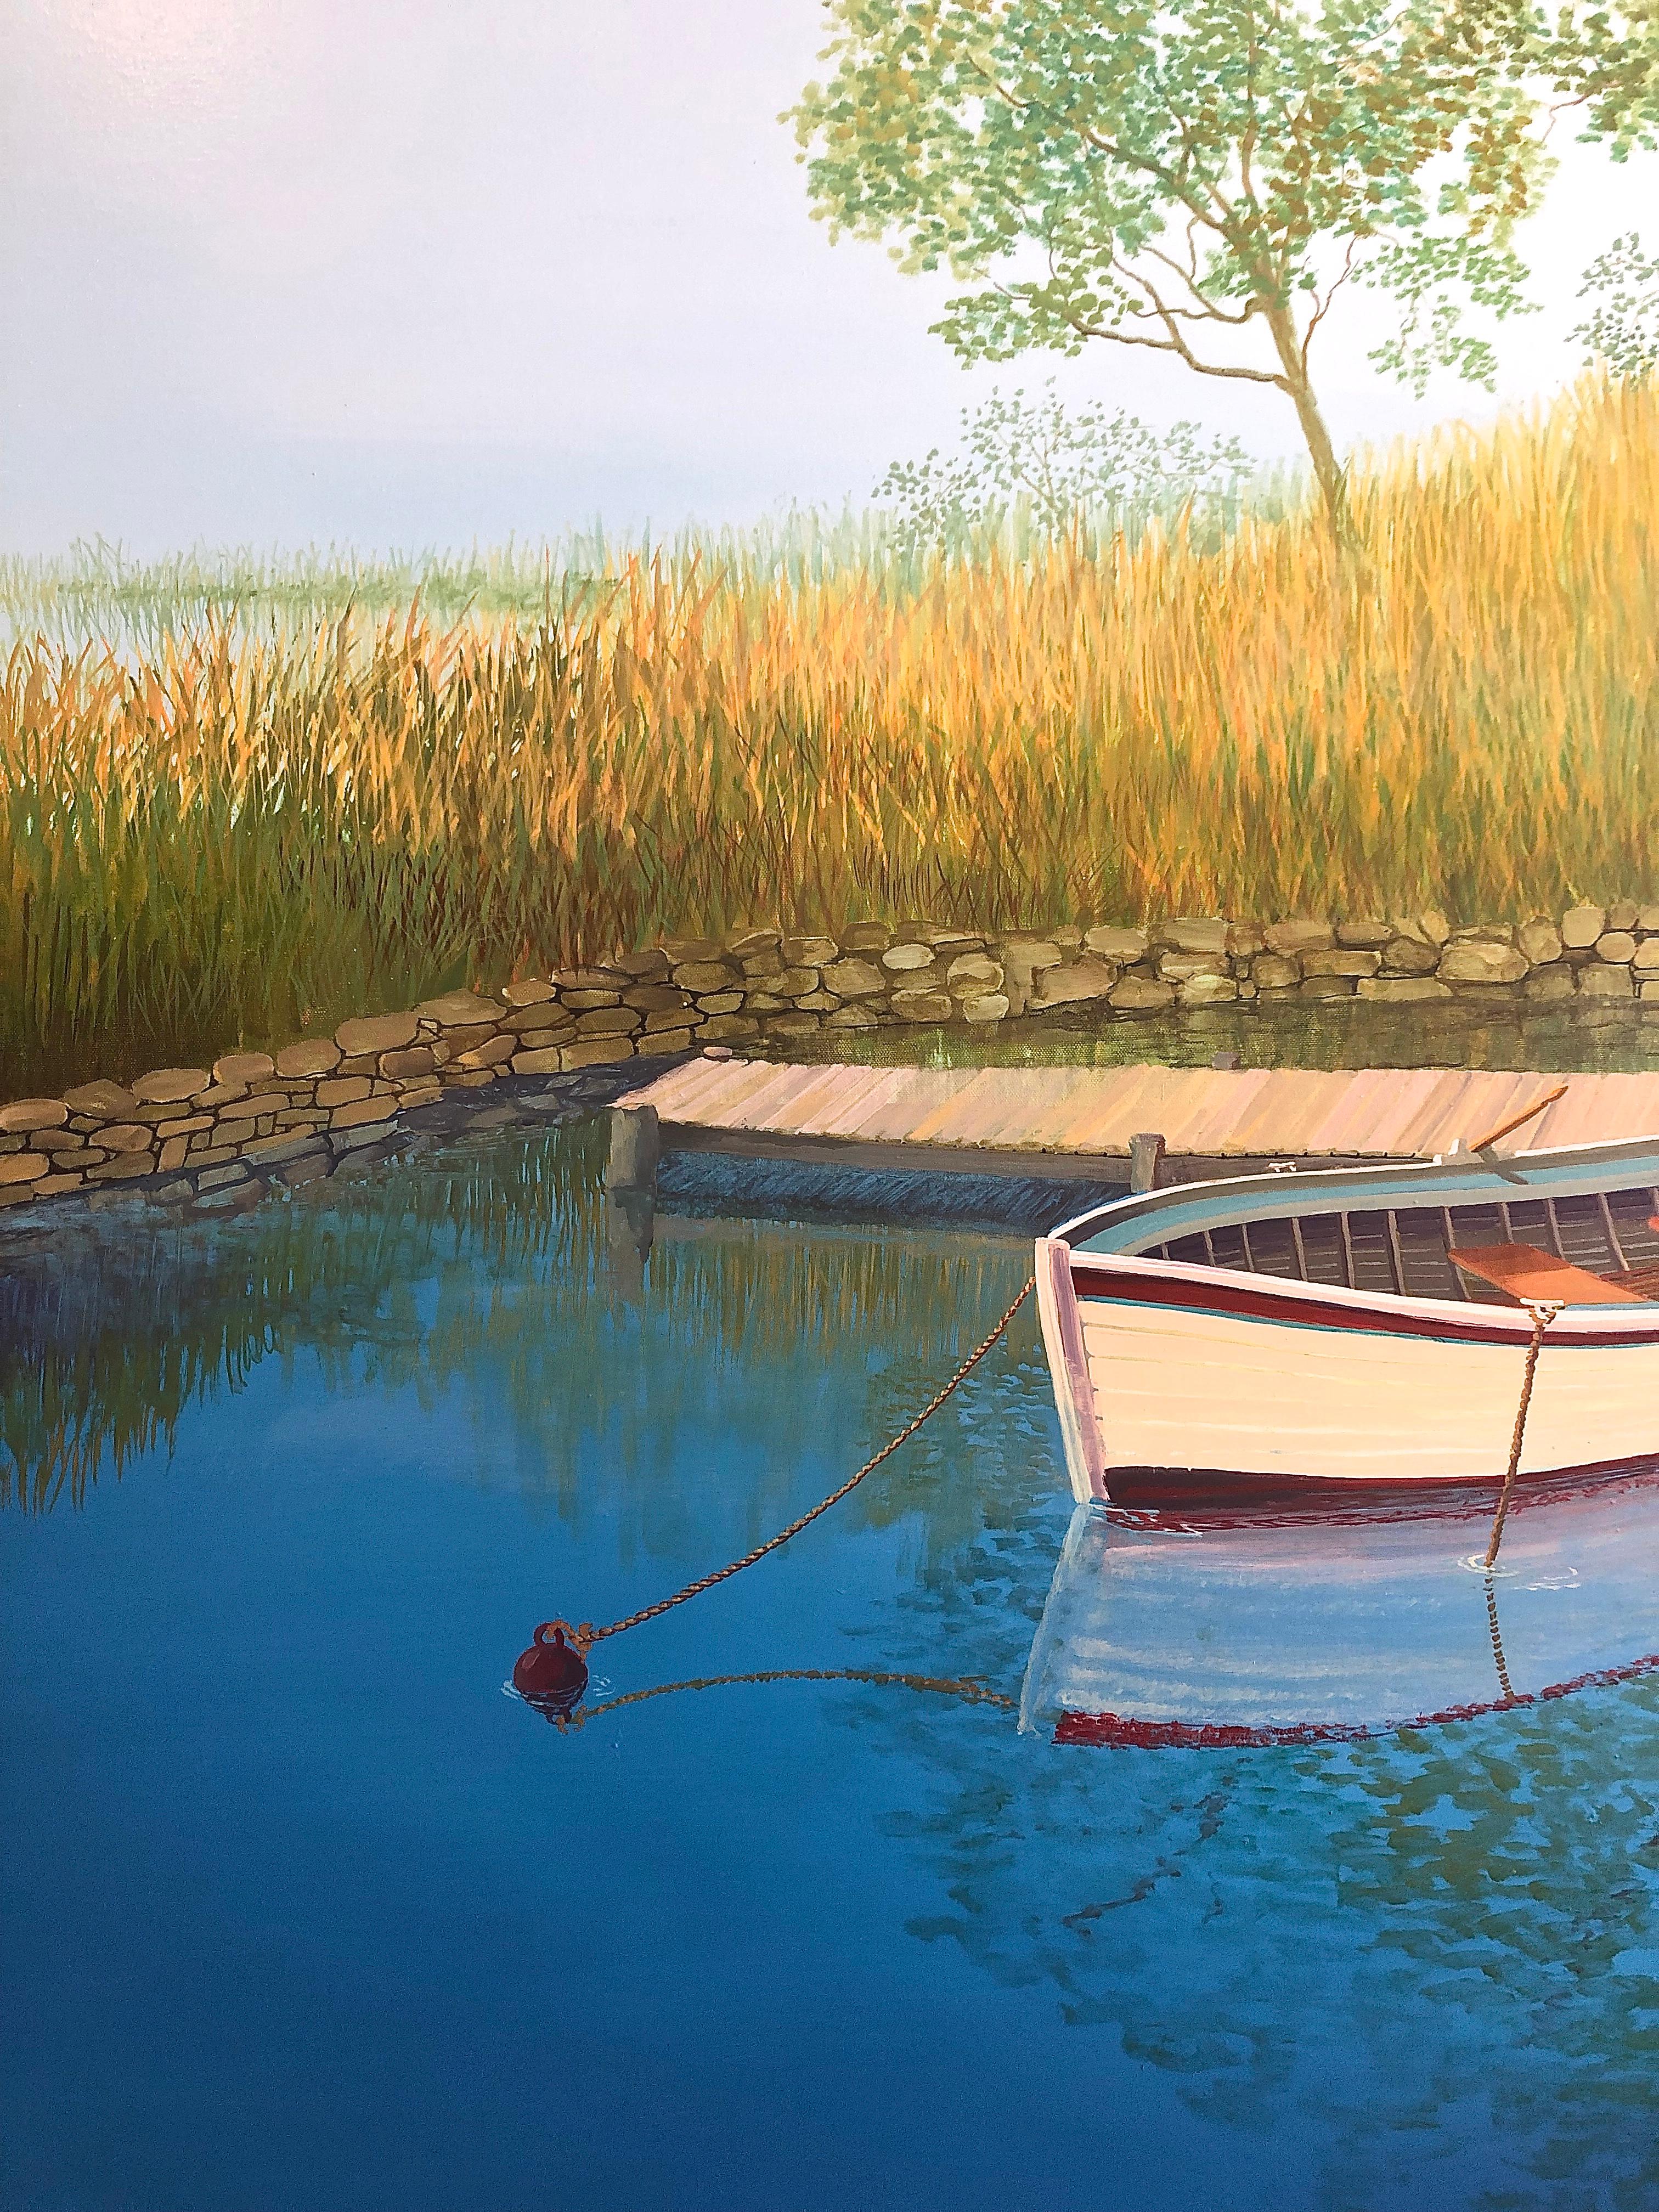 Blue Landscape With Boat On The Lake Large - Realist Painting by Unknown